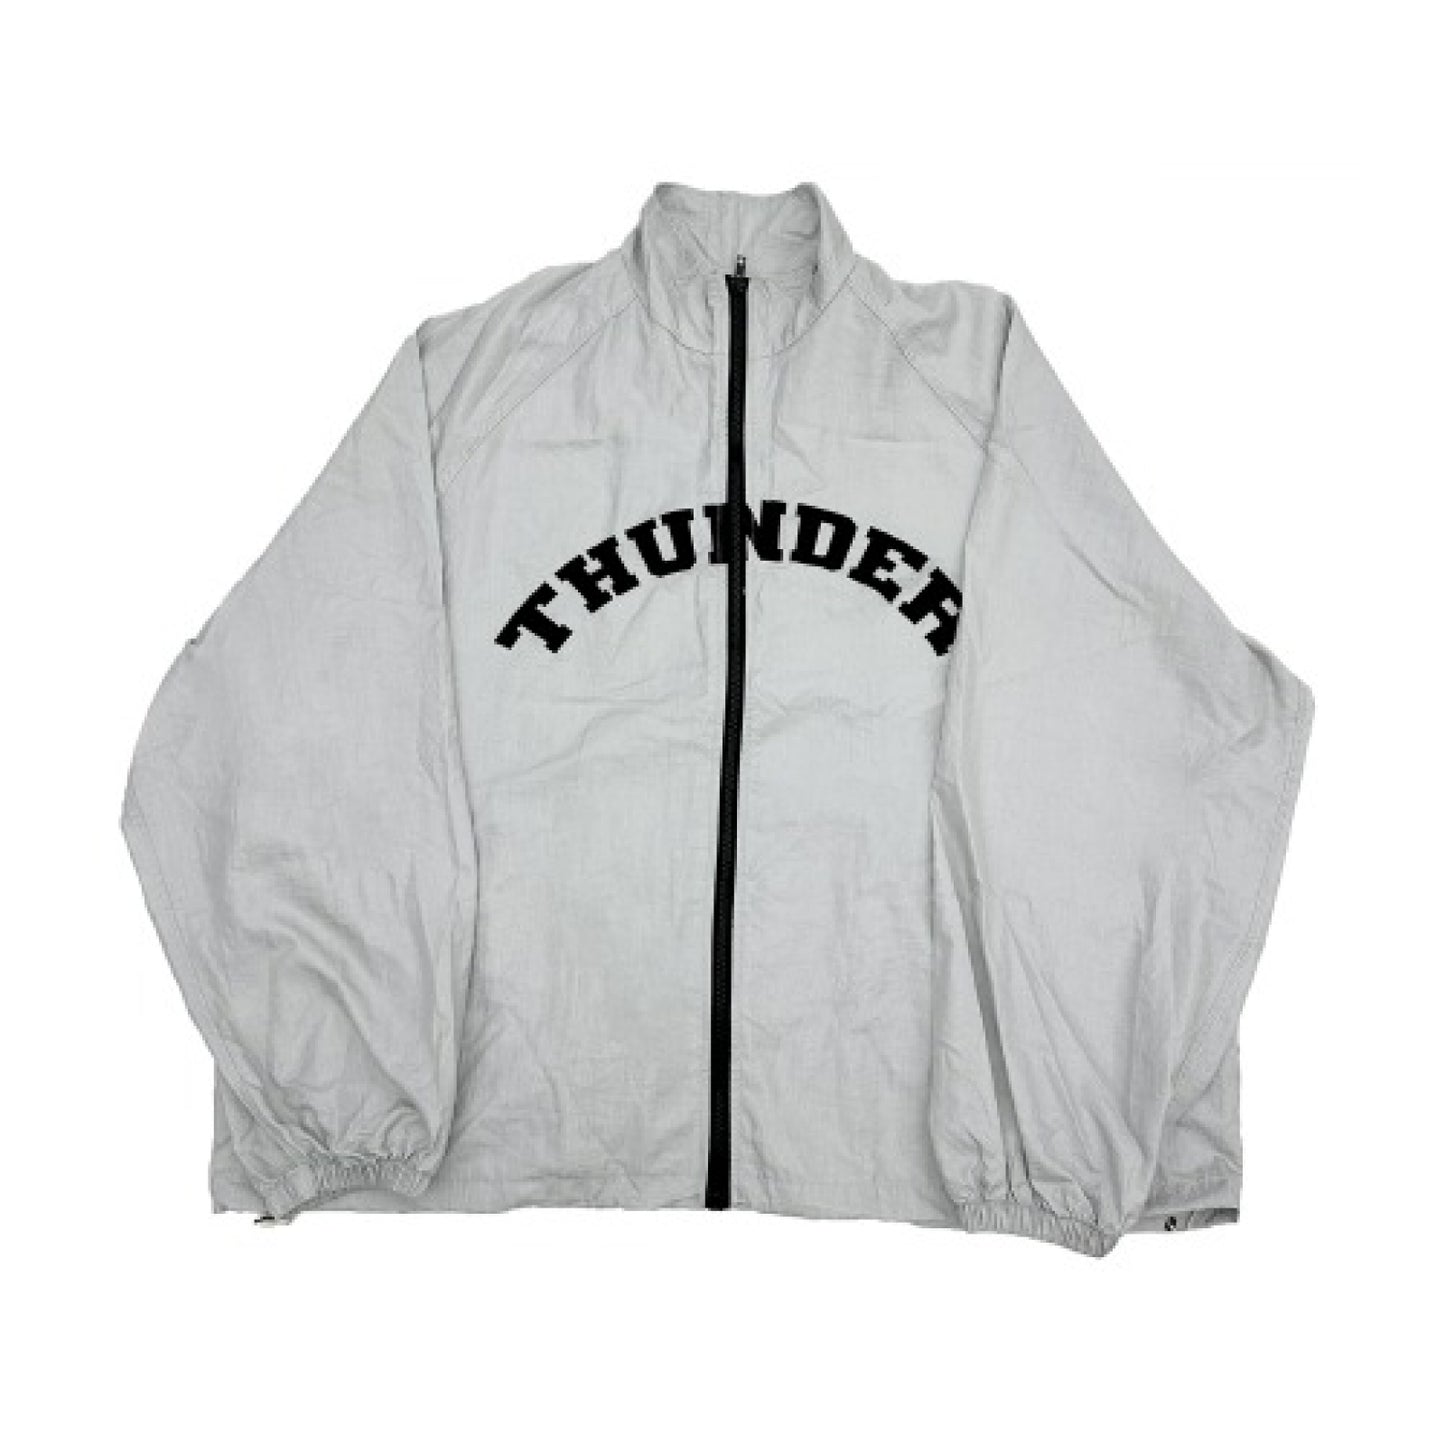 2024 ATEEZ THUNDER POP-UP - Official MD